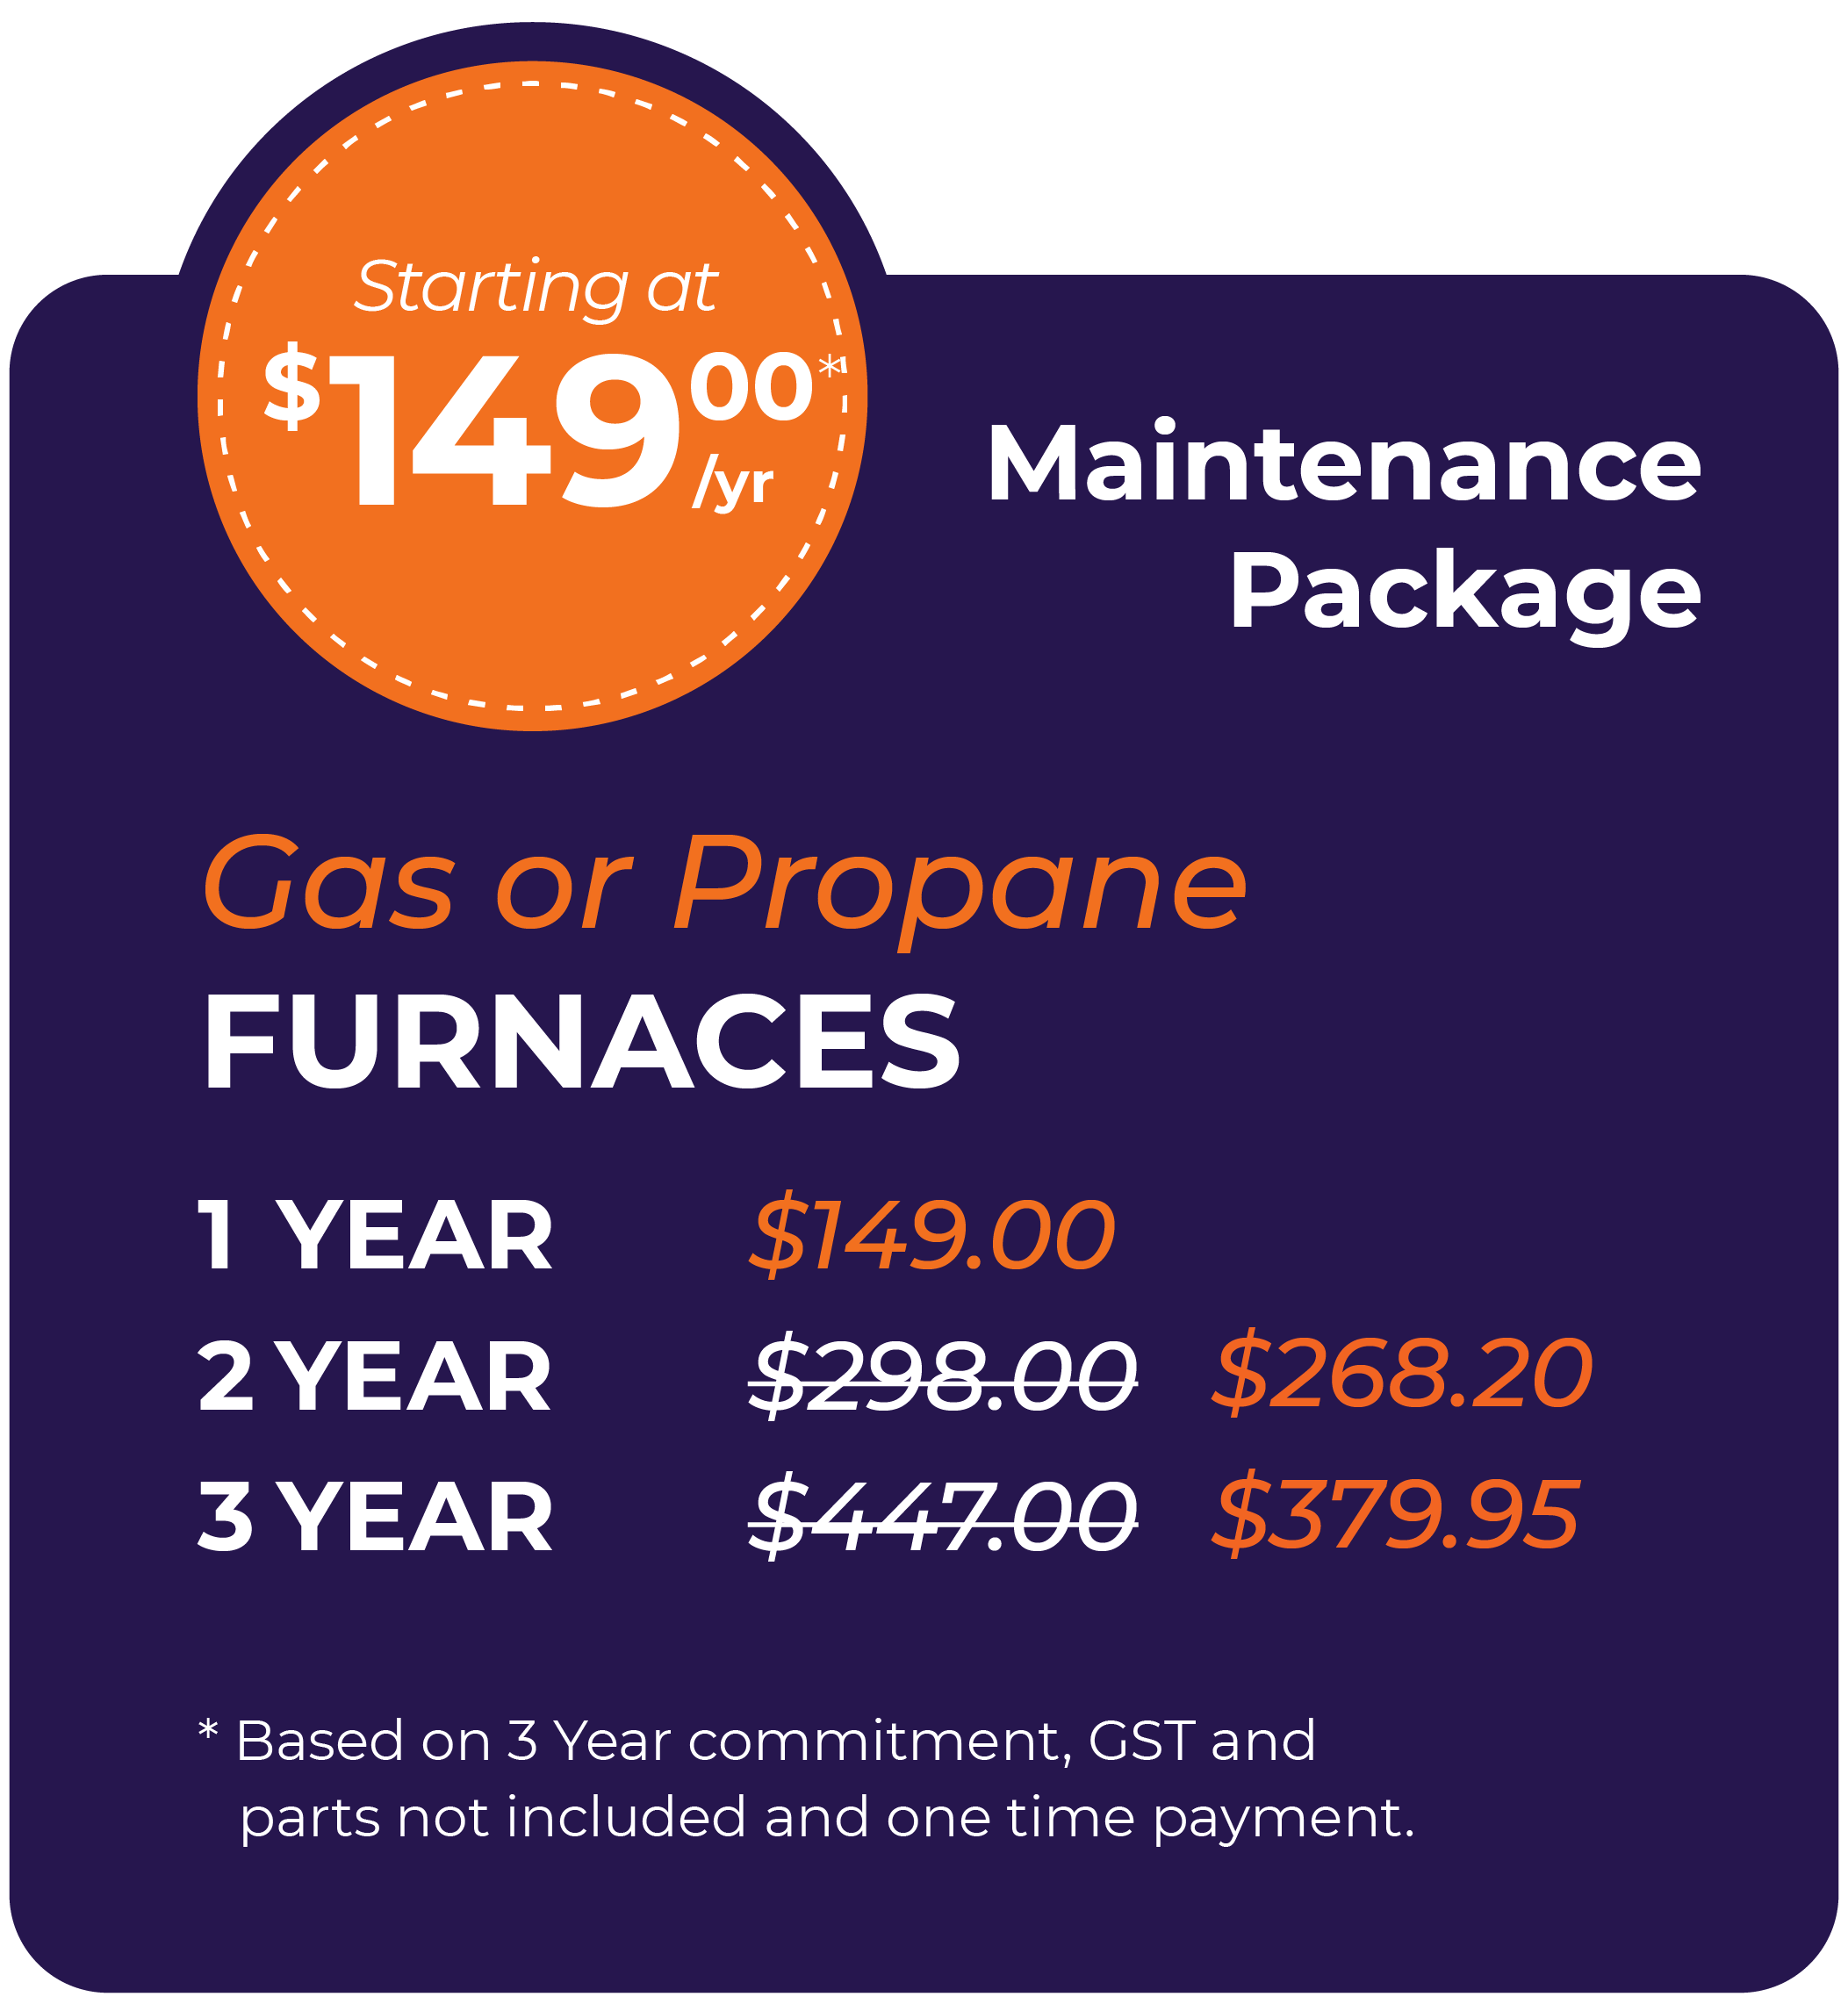 Gas or Propane Furnace Maintenance Package